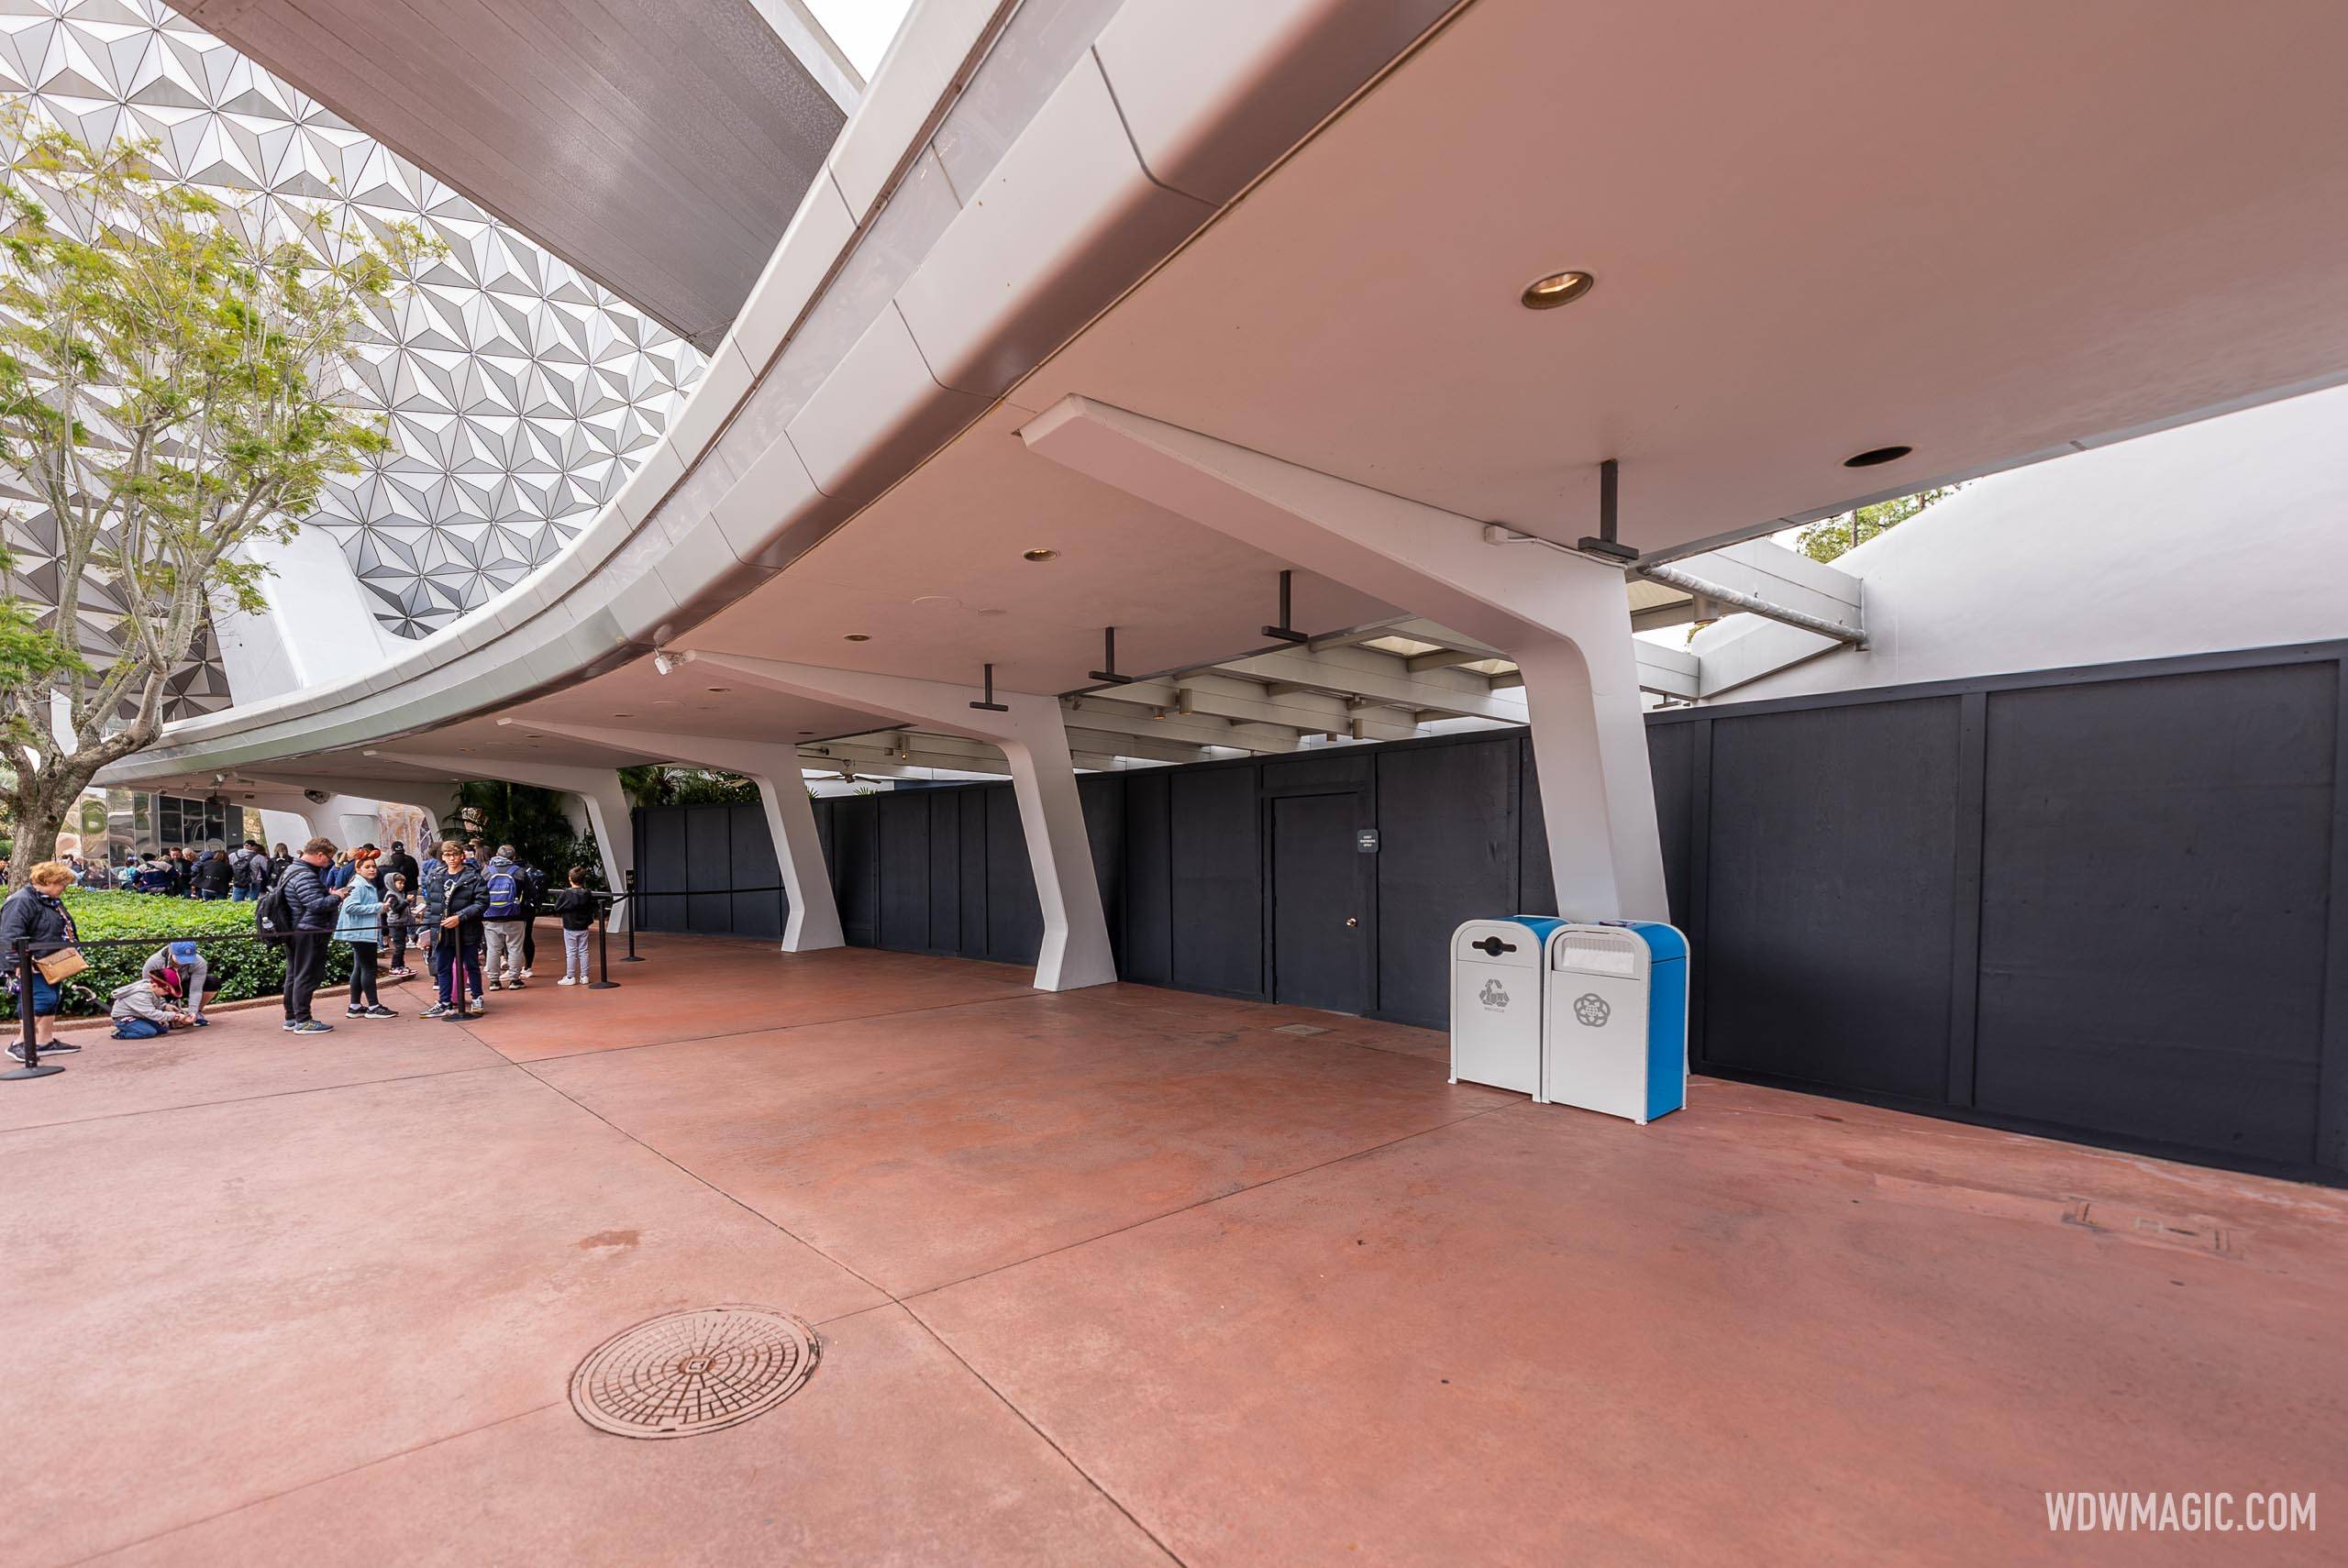 Work continues on the now-closed EPCOT bypass walkway